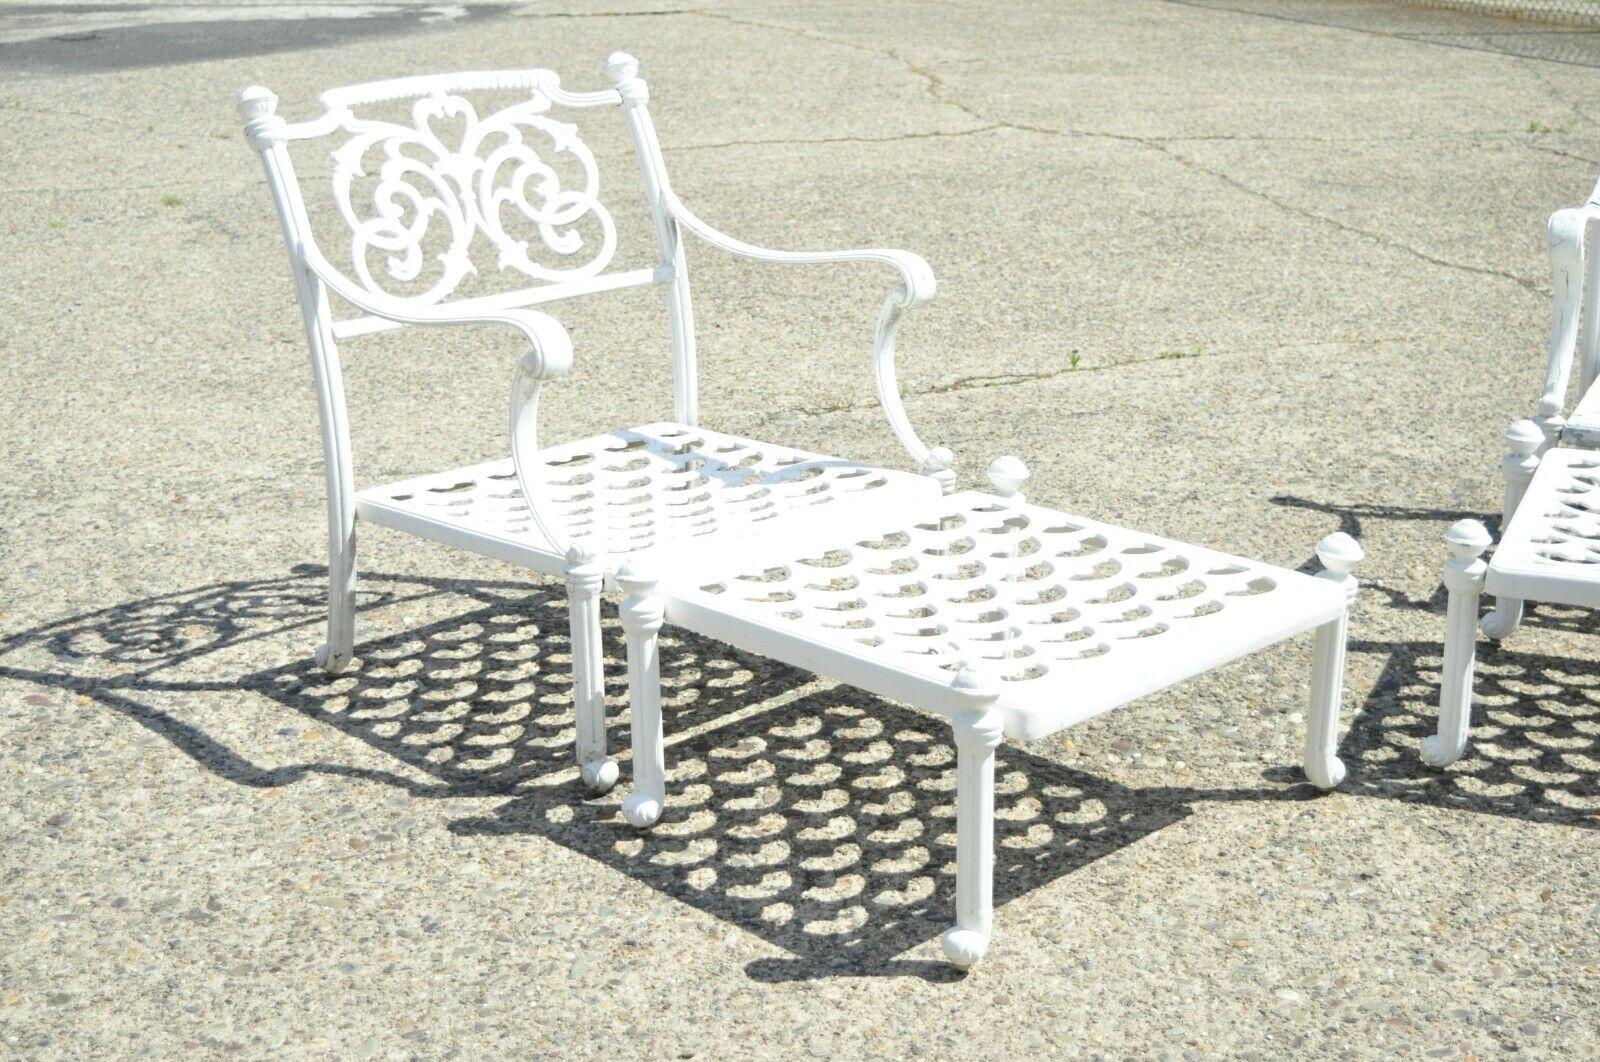 Modern Italian Regency style scrollwork cast aluminum garden patio club lounge arm chairs with ottomans- a pair. Listing includes (2) Armchairs, (2) Ottomans, fancy scroll work backs, low comfortable forms, lattice fretwork seats, cast aluminum